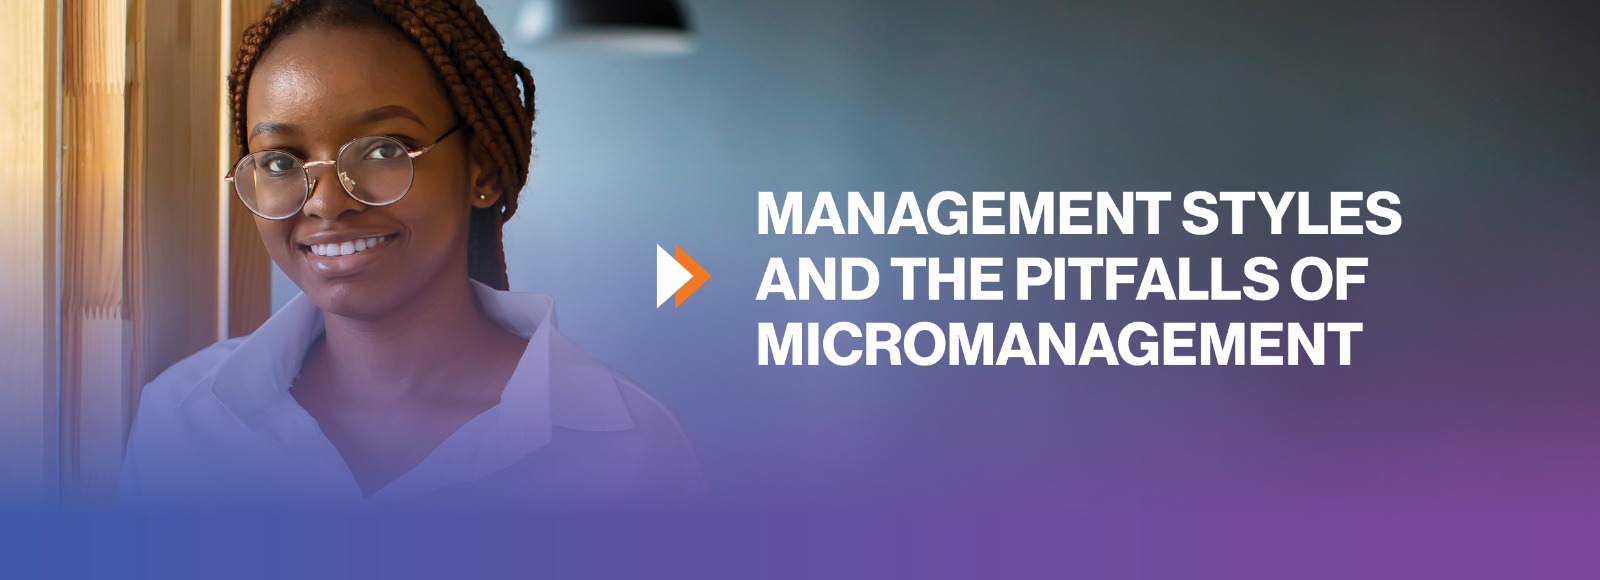 Management Styles and the Pitfalls of Micromanagement